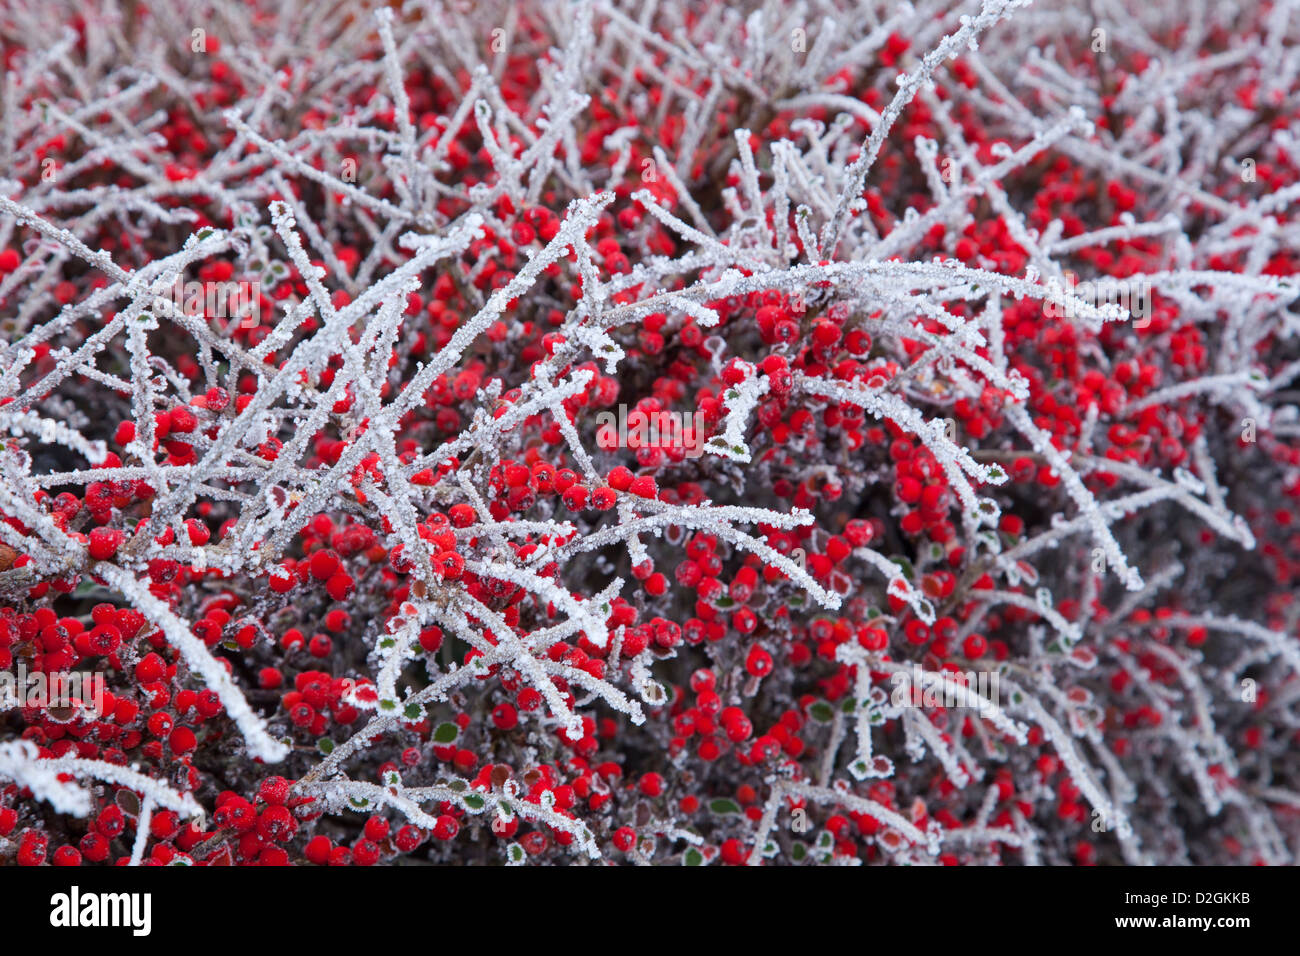 Winter Cotoneaster fruity evergreen shrub covered in a hoar frost Stock Photo